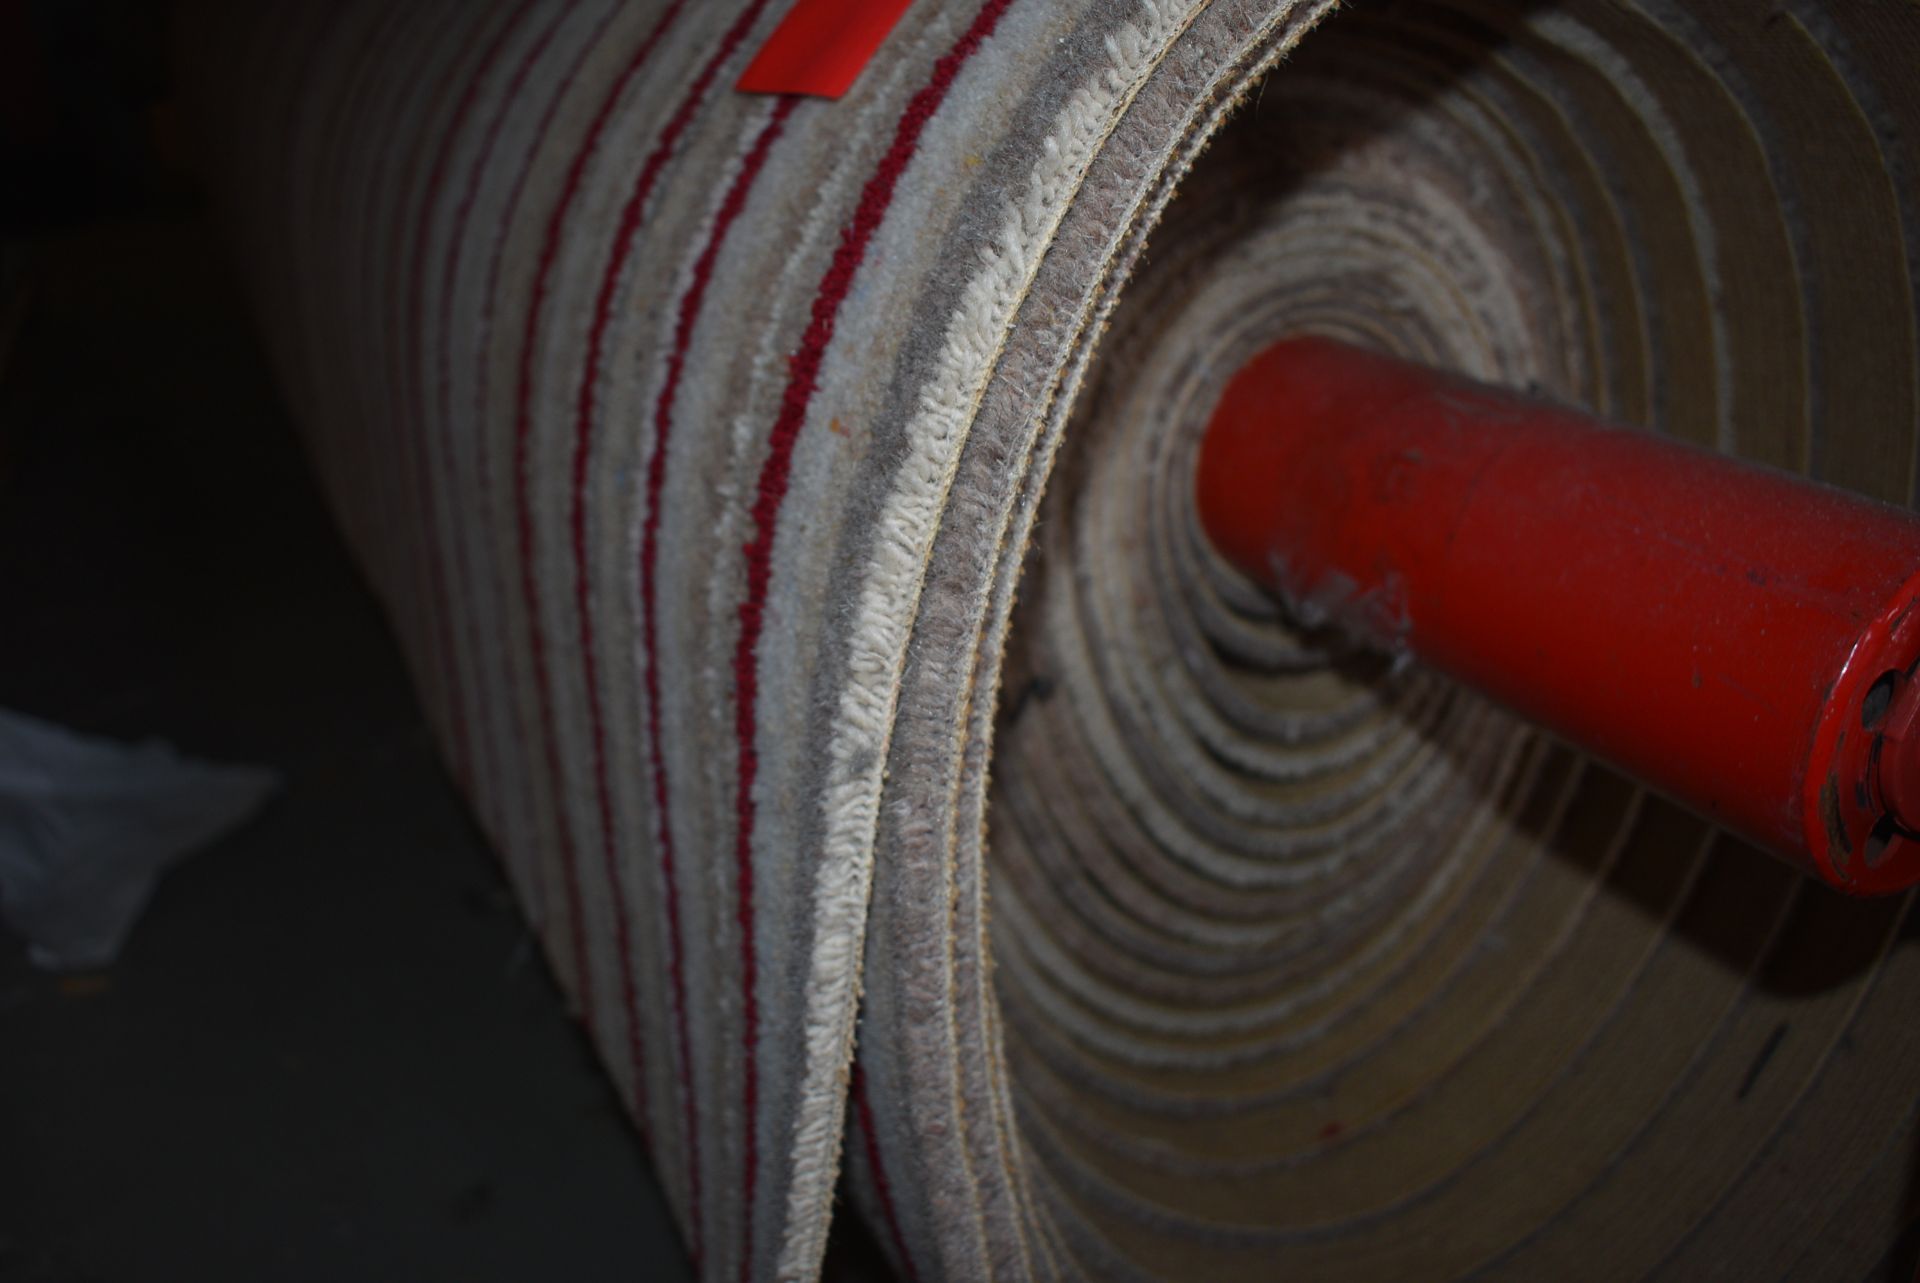 4m wide Roll of Beige & Red Stripped Carpet